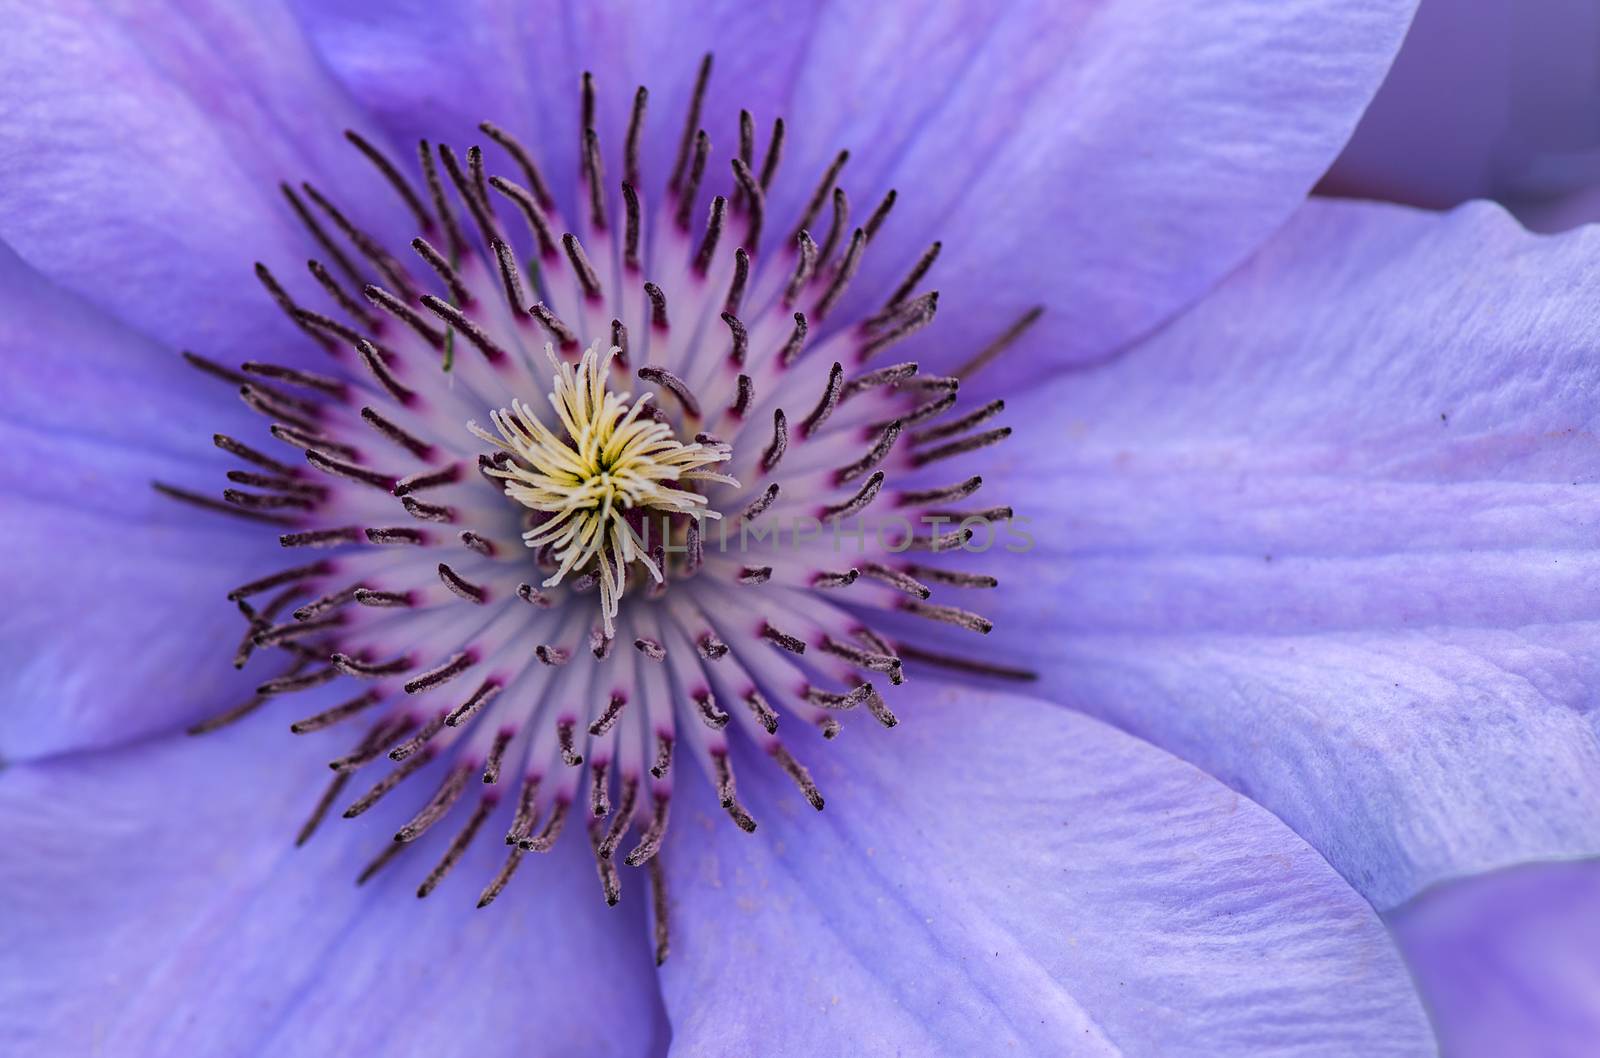 Close up photo of a clematis flower